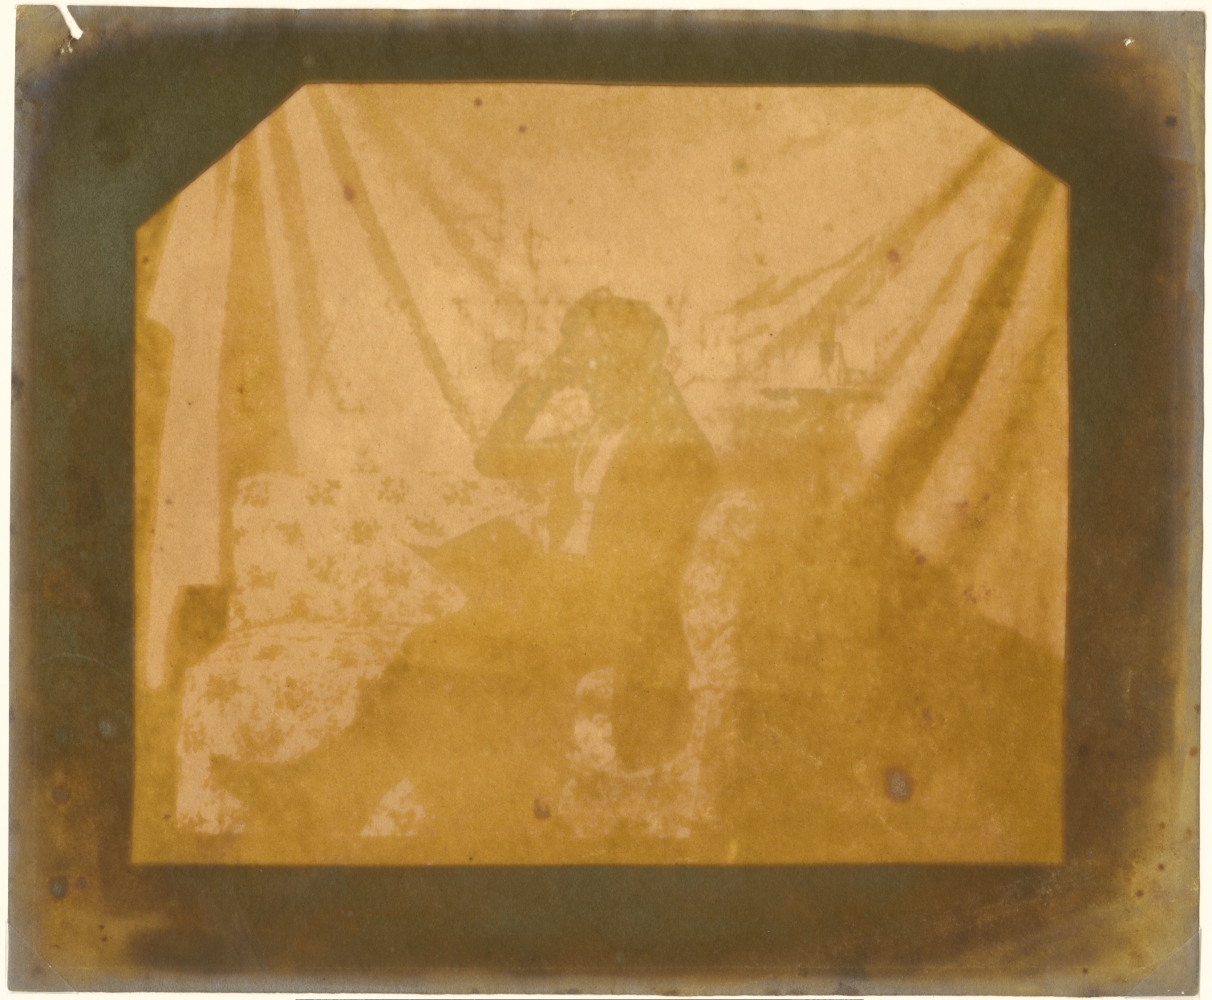 William Henry Fox TALBOT (English, 1800-1877) Nicolaas Henneman reading on a couch, 2 October 1841 Salt print from a calotype negative 14.9 x 17.7 cm on 18.8 x 22.7 cm paper